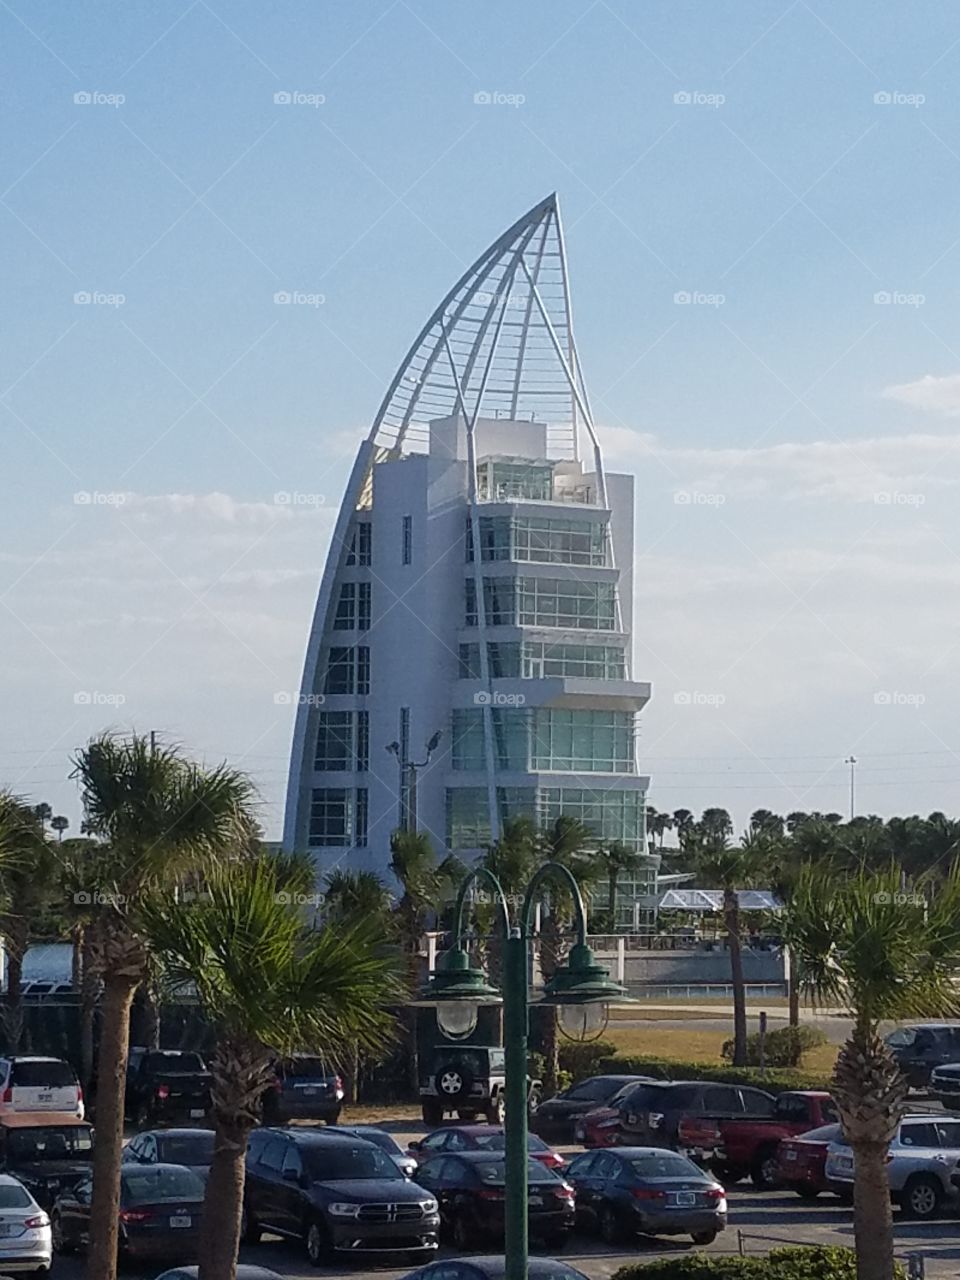 Exploration Tower at Port Canaveral, Florida